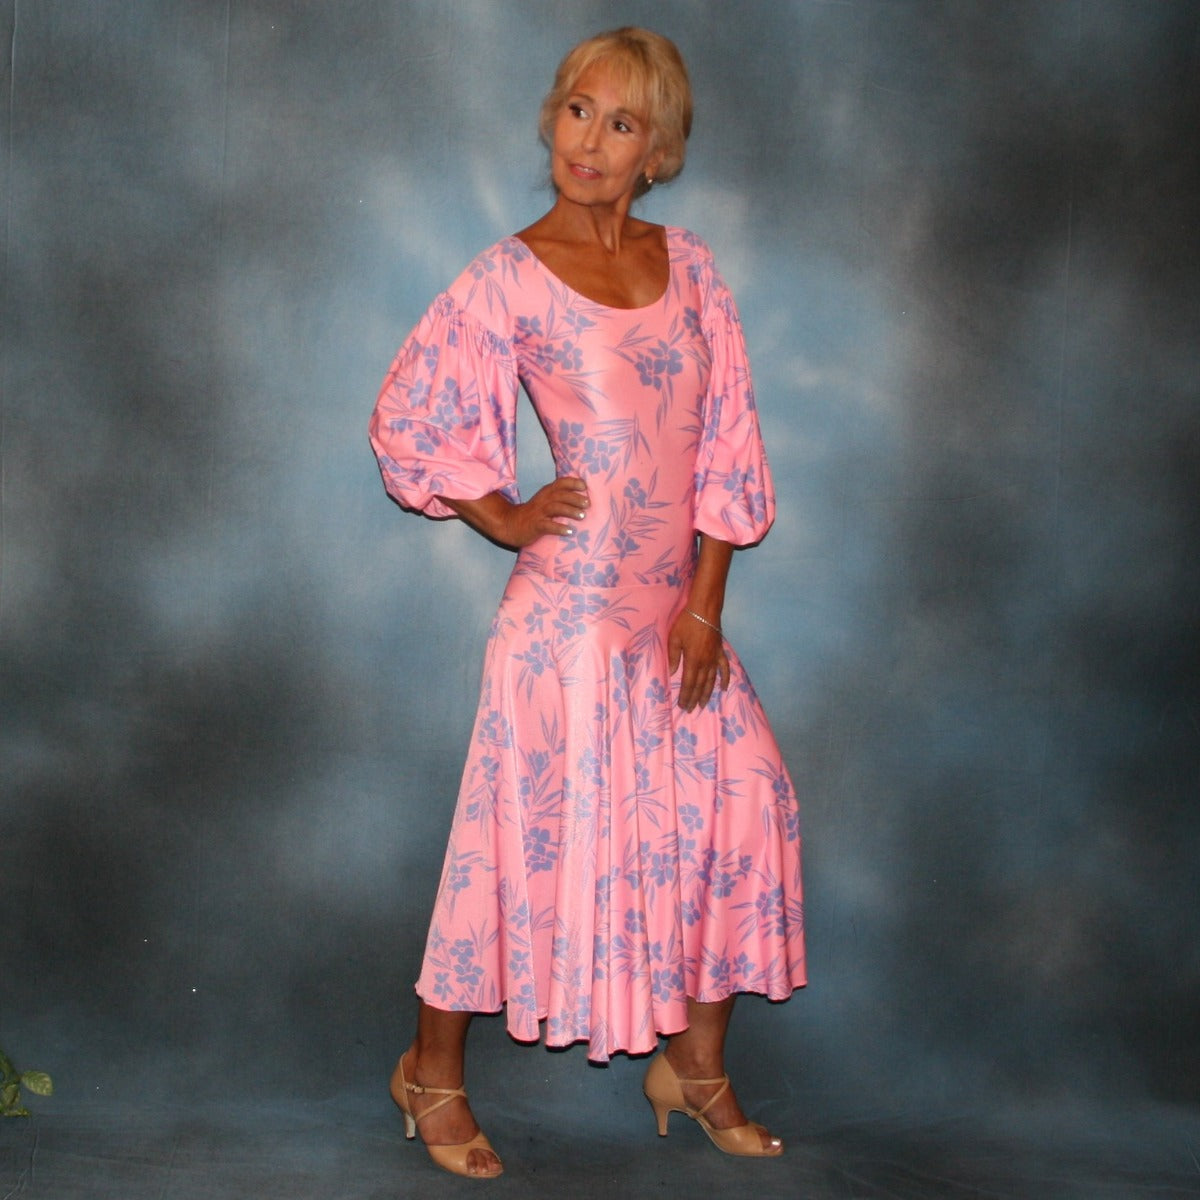 Soft pink & blue tropical print lycra dress created of tropical print lycra with drop shoulder pouf sleeves & full circle skirt, with a bodysuit base, so a great dress for Latin/rhythm dance practice, as well as a great ballroom dance teacher dress, especially if you work on drops & lifts!